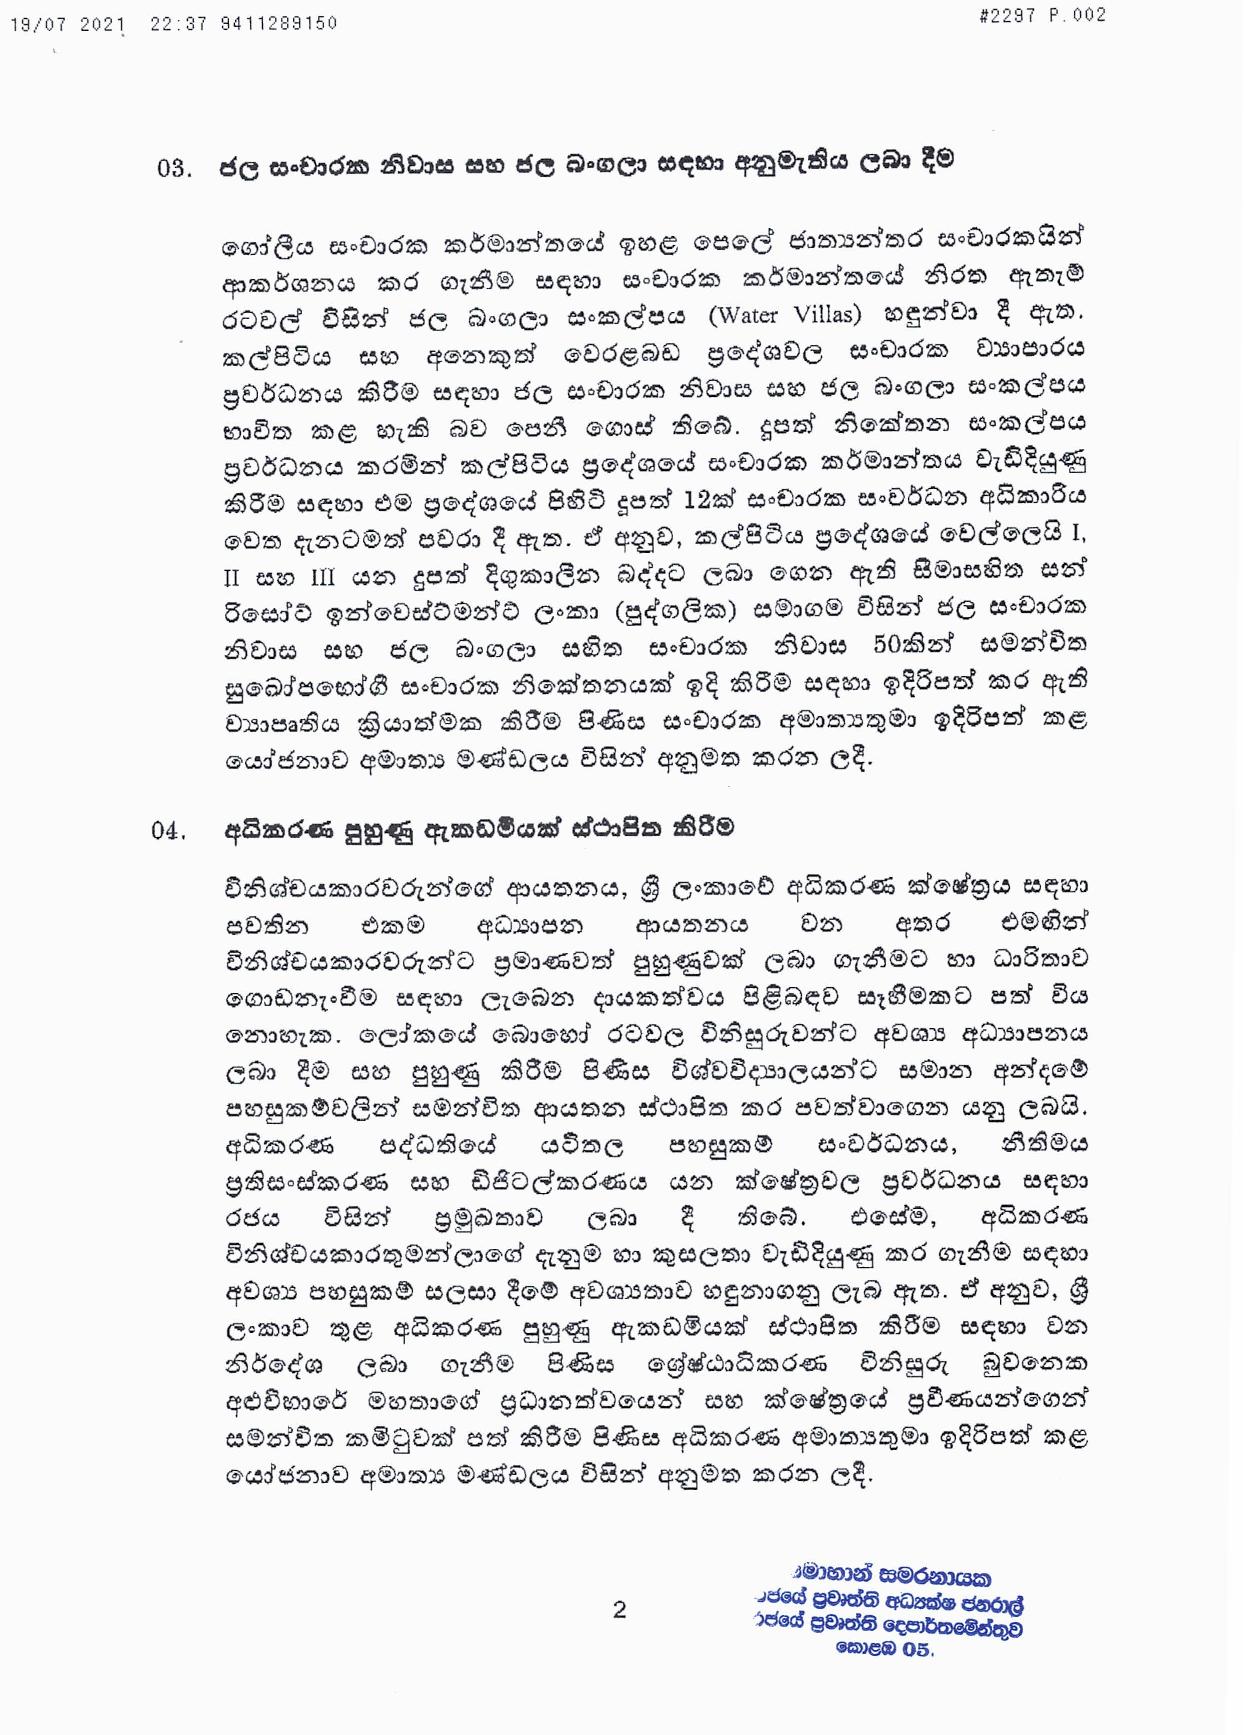 Cabinet decision on 19.07.2021 Sinhala page 002